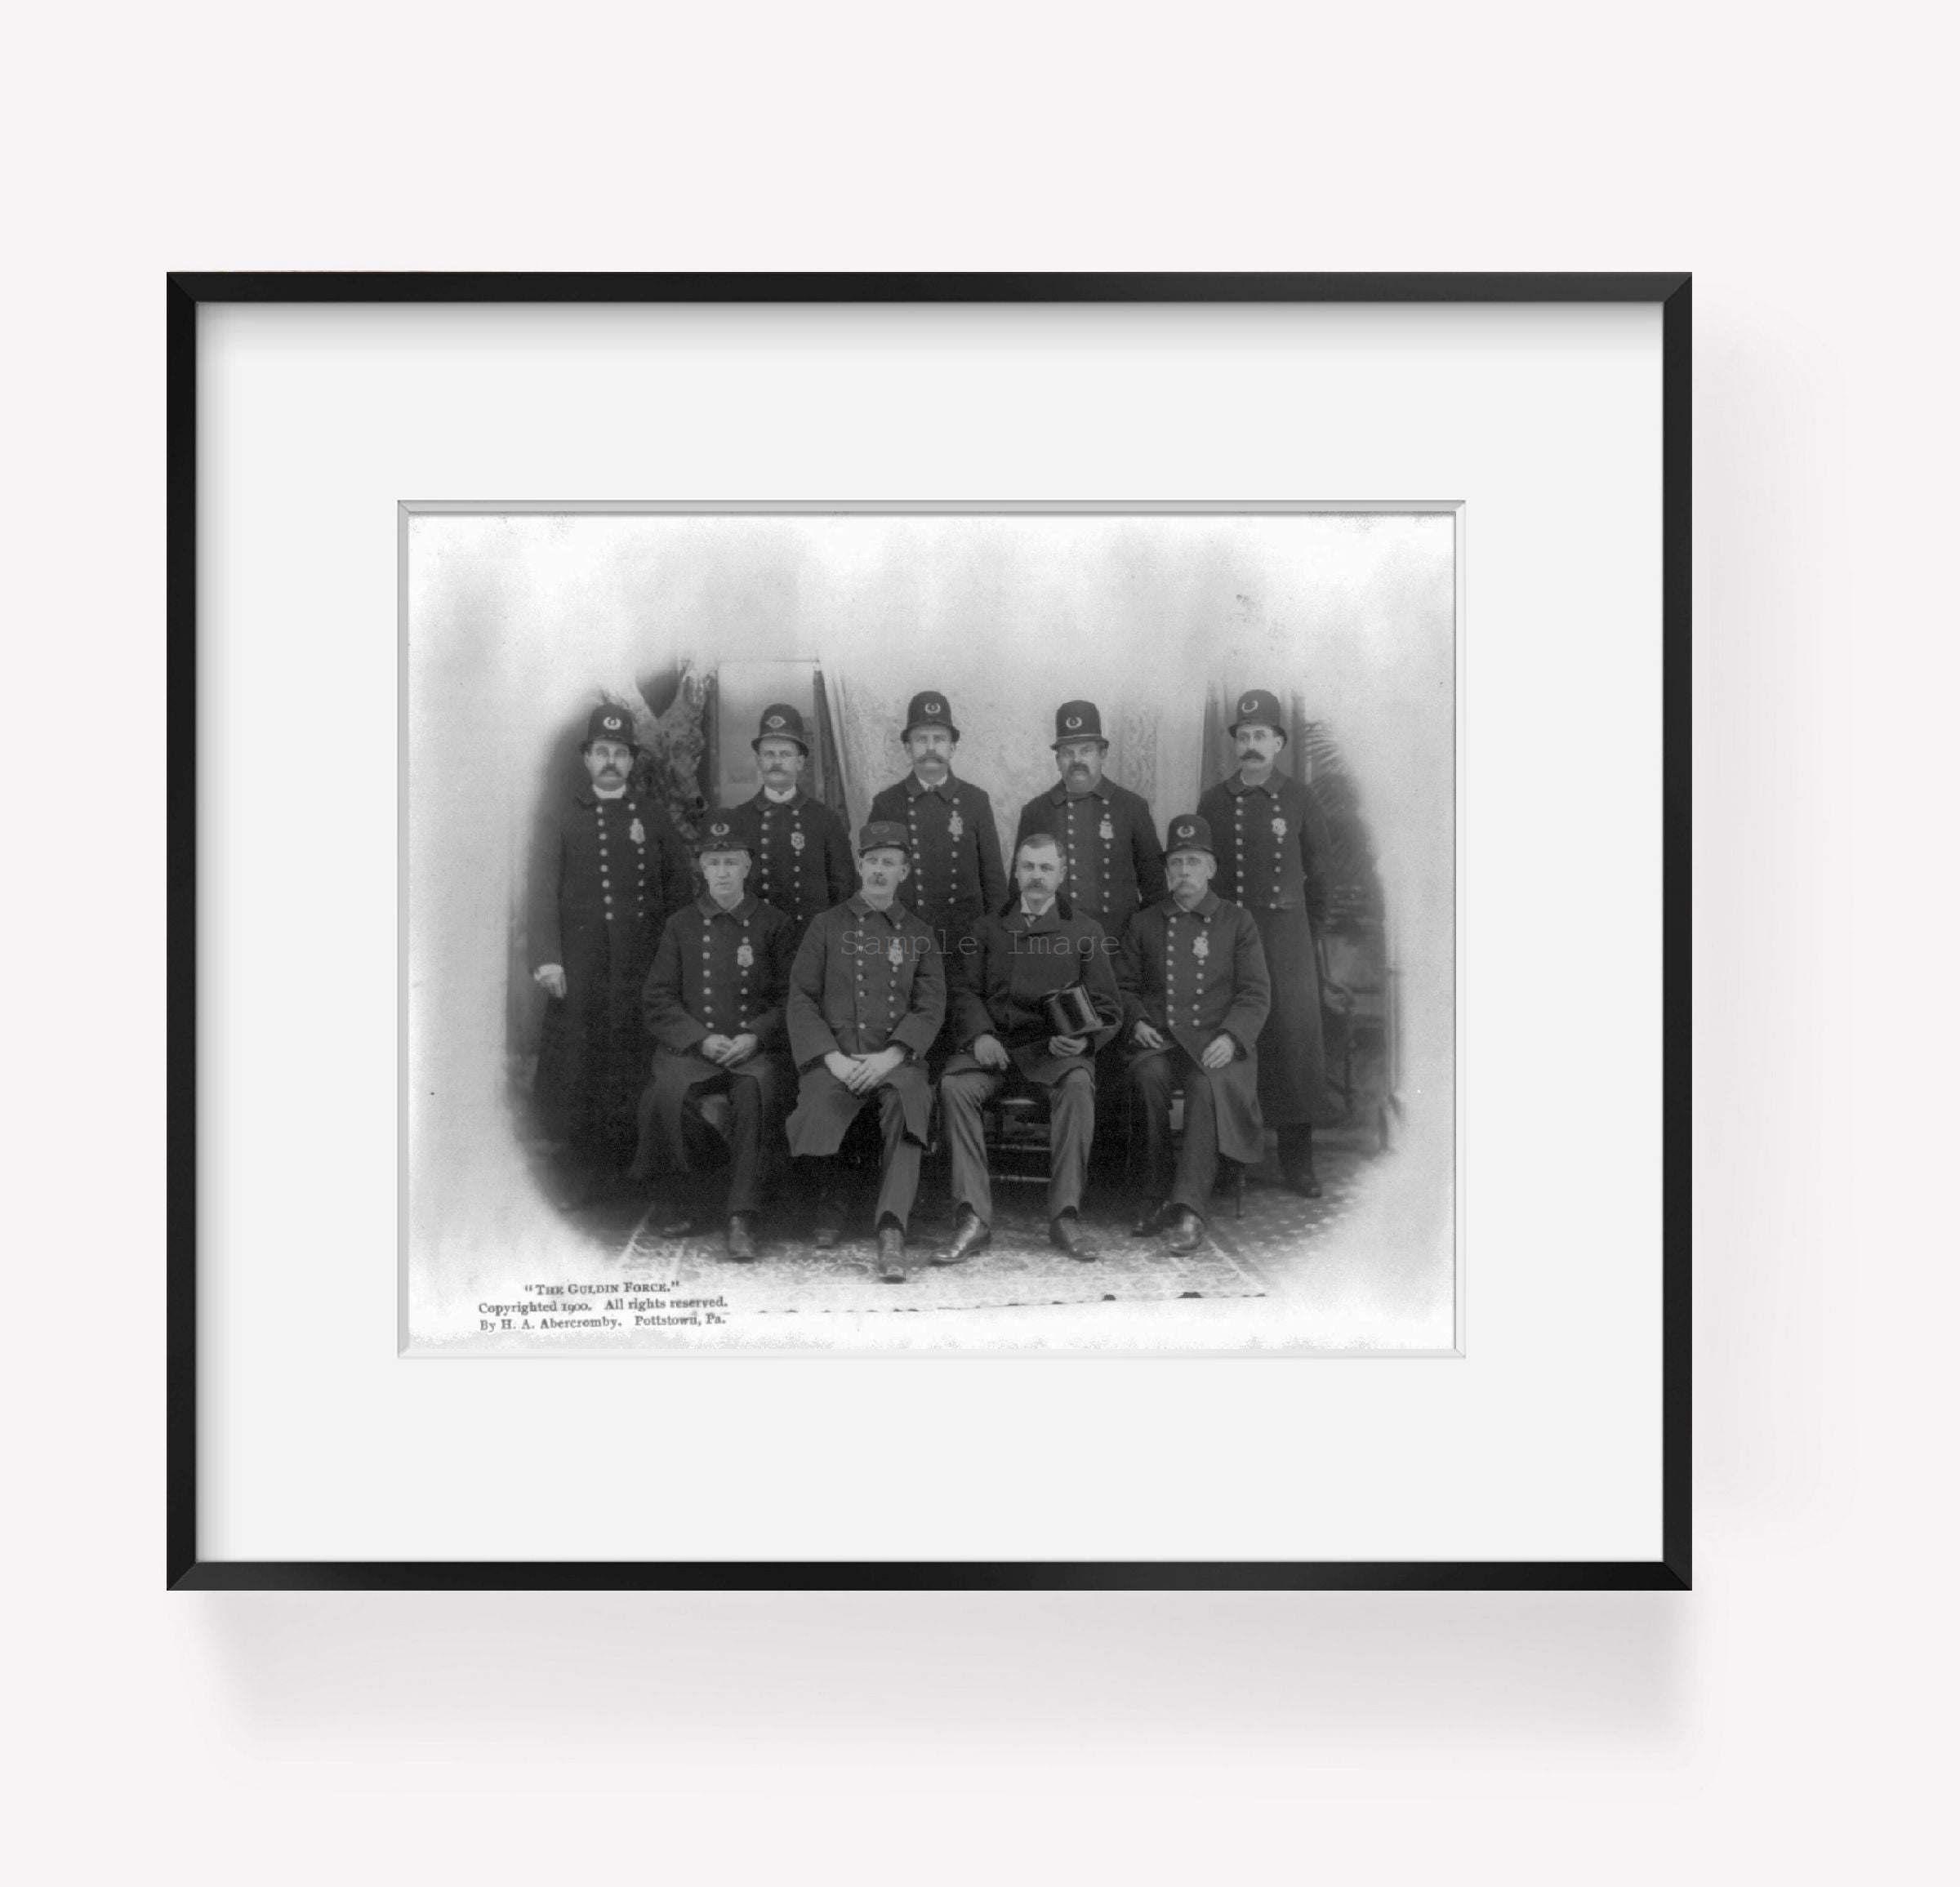 1900 Photo The Guldin force Portrait group of 8 policemen.